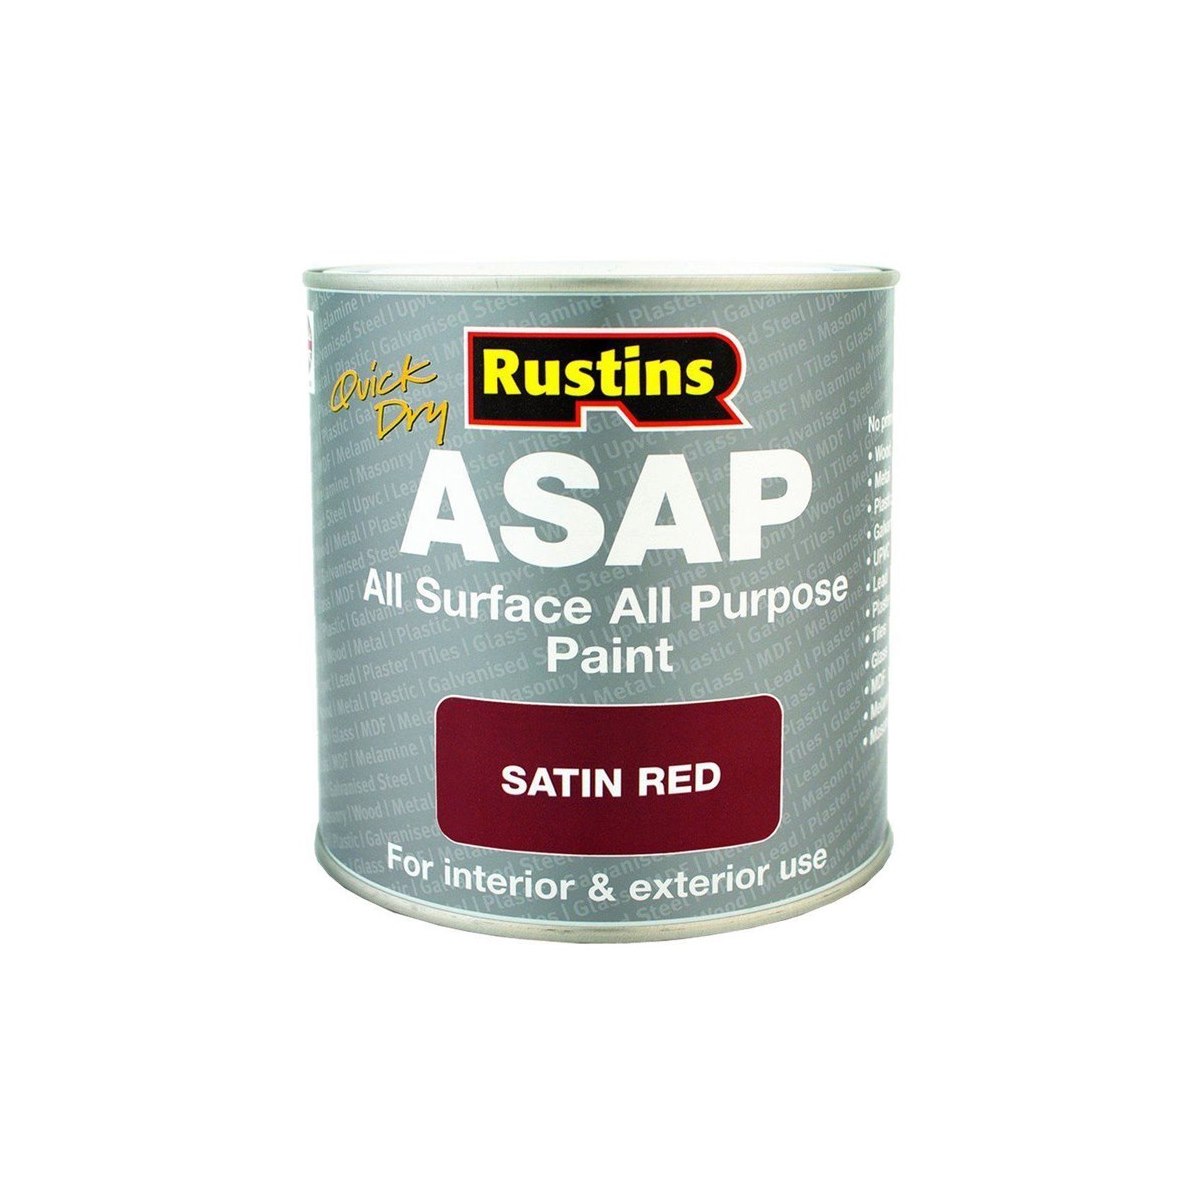 Rustins Quick Dry All Surface All Purpose Paint (ASAP) Red 250ml